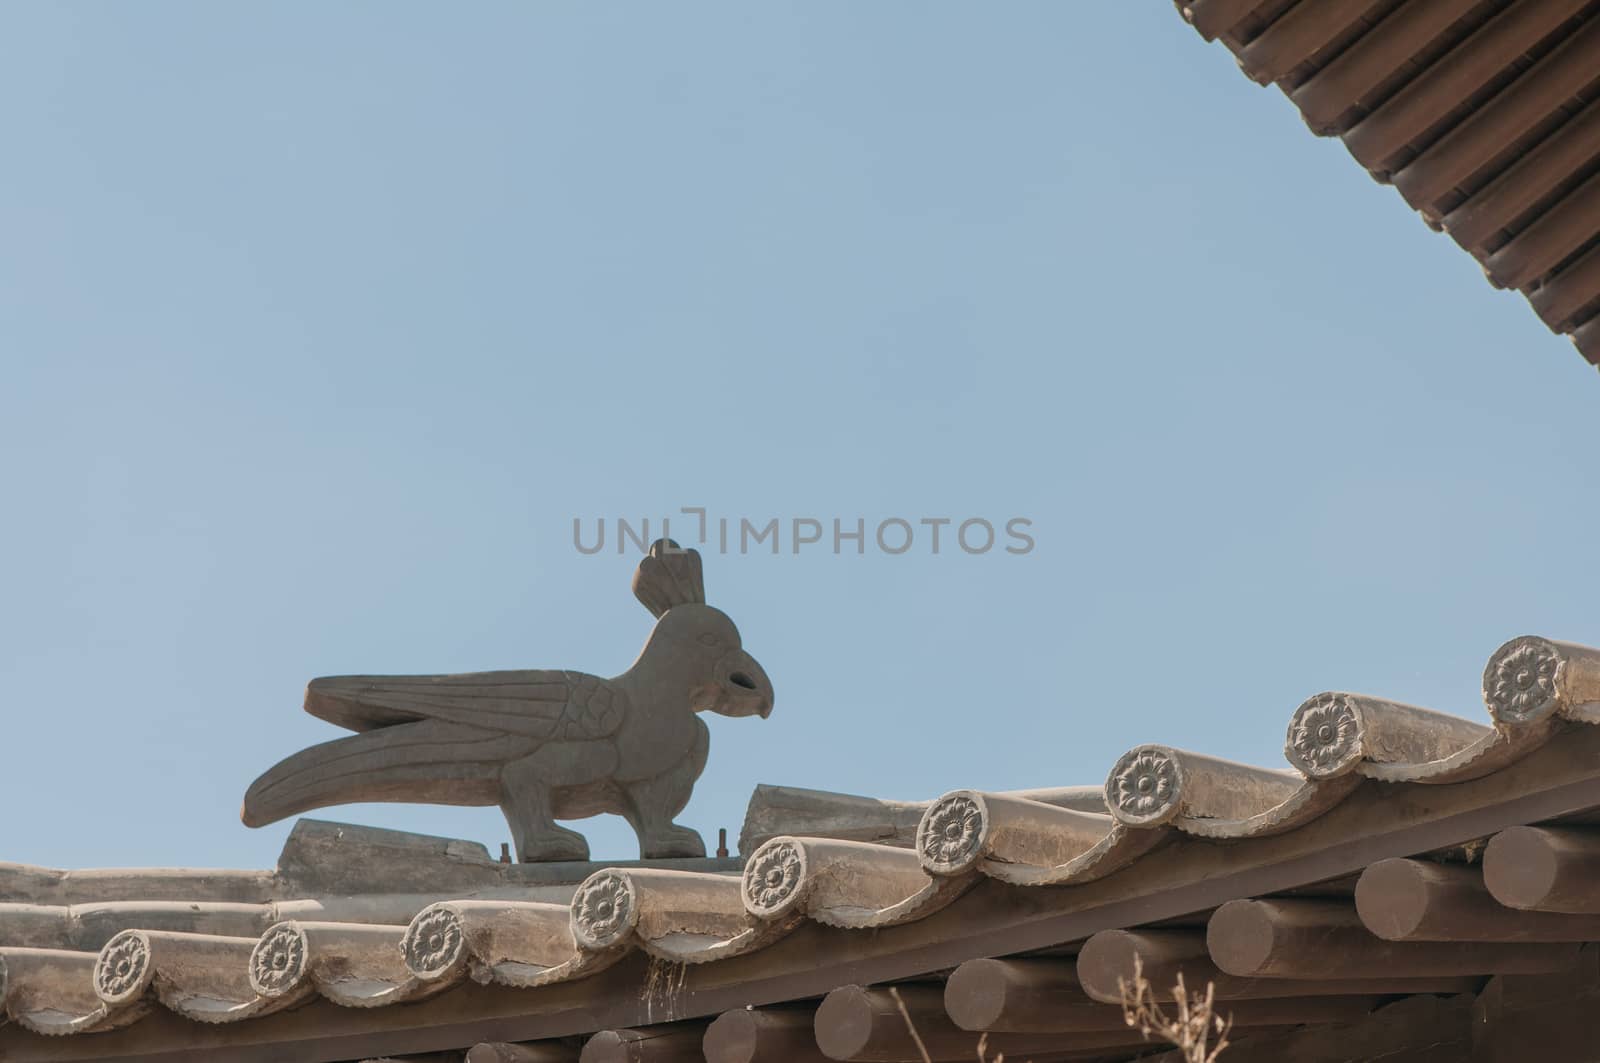 the horizontal view of the mythology bird on the roof